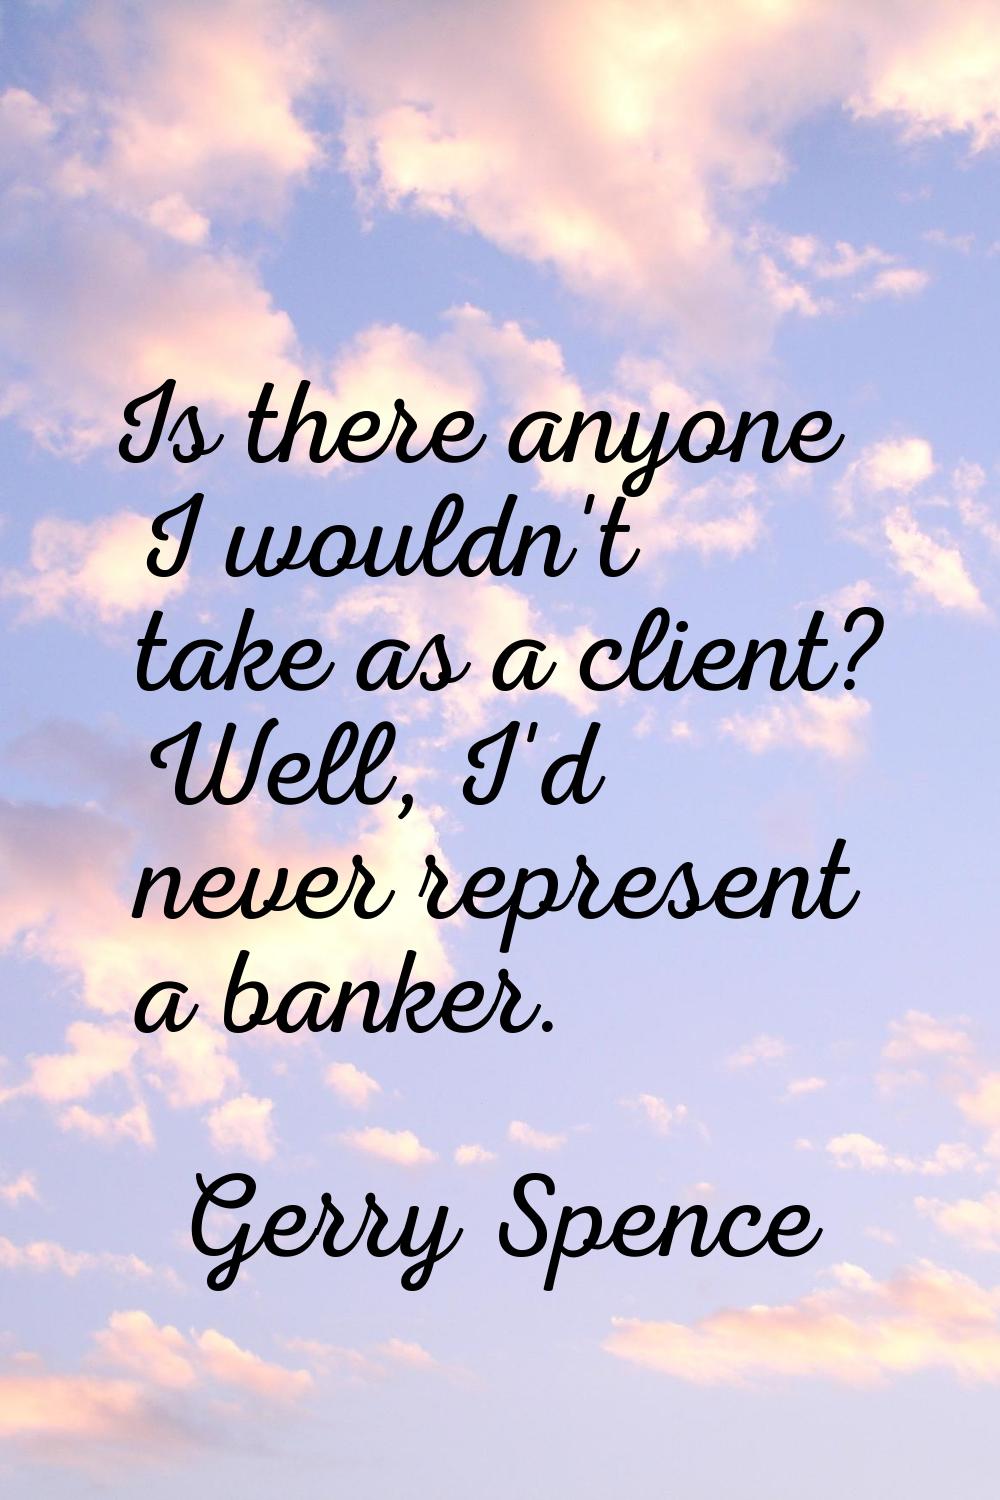 Is there anyone I wouldn't take as a client? Well, I'd never represent a banker.